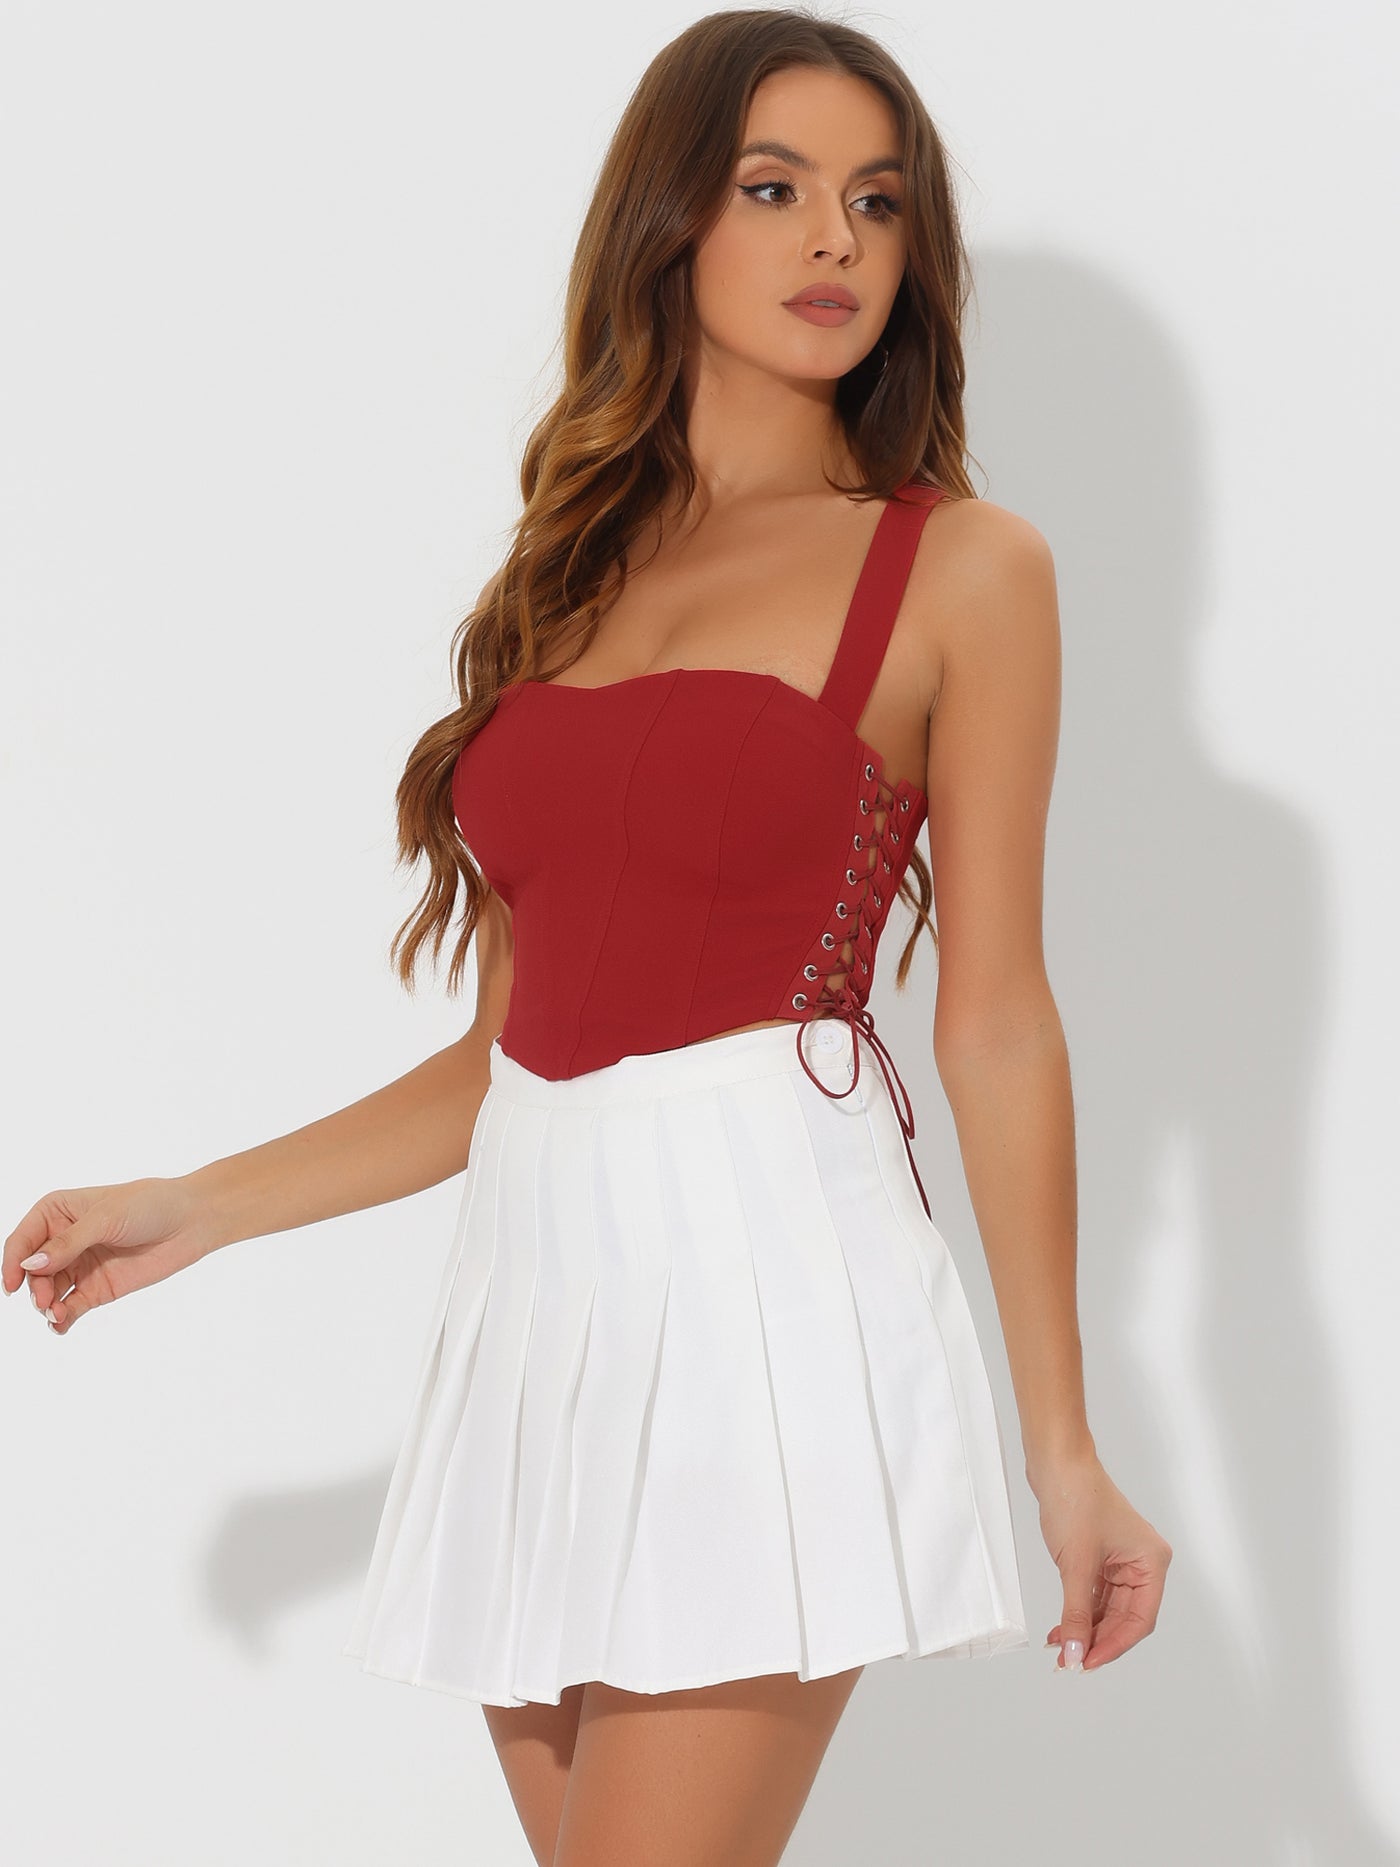 Allegra K Sleeveless Bustier Corset Tops Lace-up Sexy Clubwear Party Crop Top